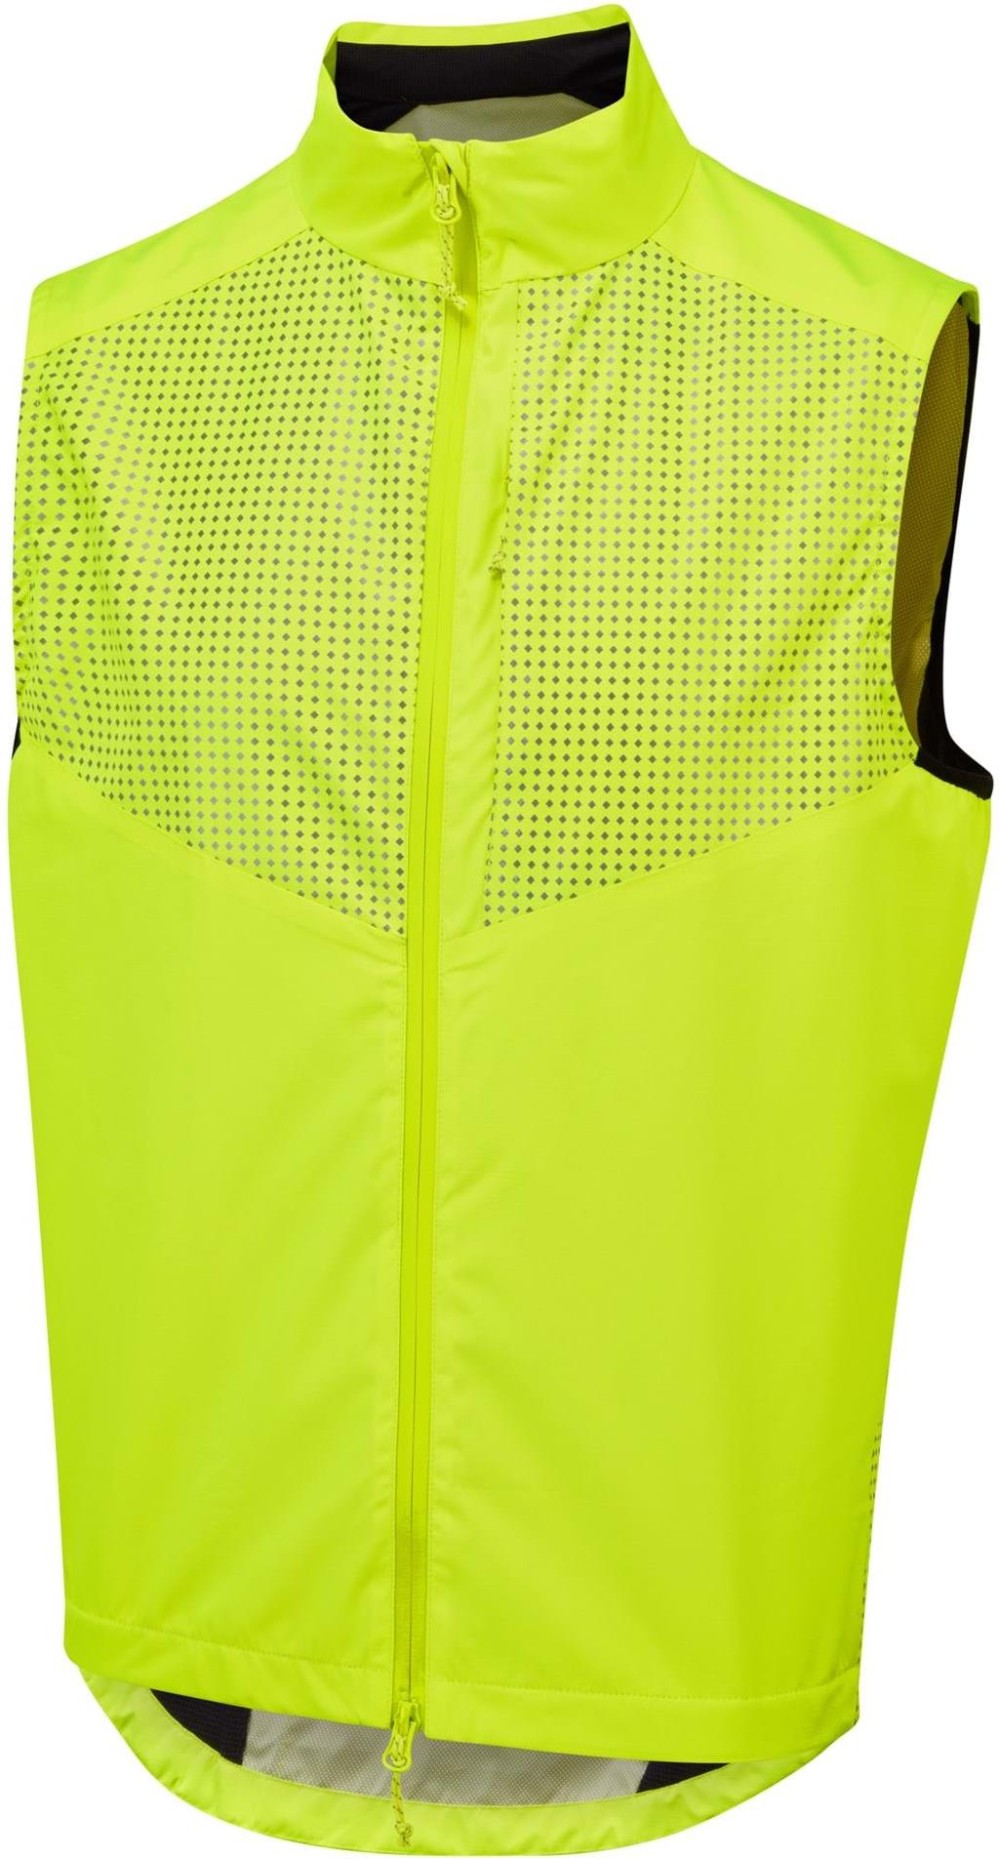 Nightvision Thermal Gilet image 1